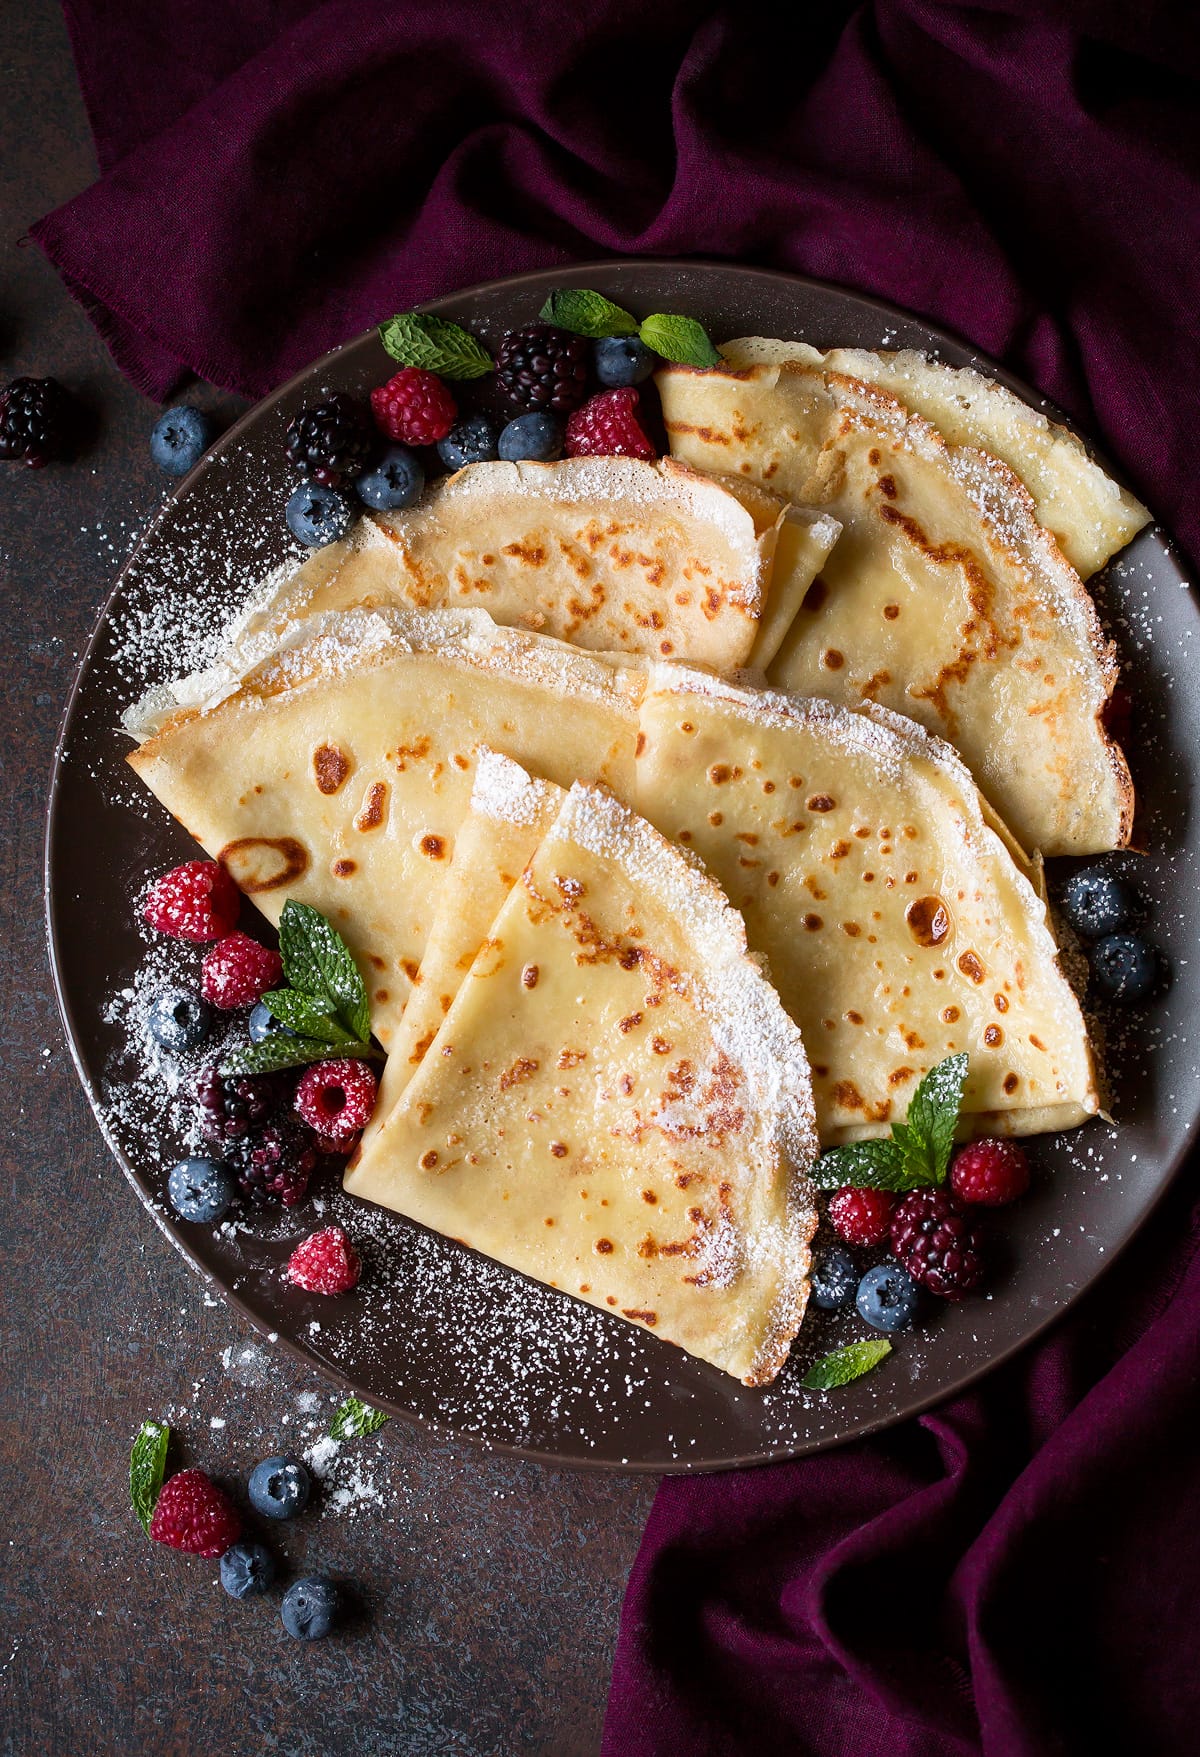 Crepes How To Make Crepes and Topping Ideas Cooking Classy